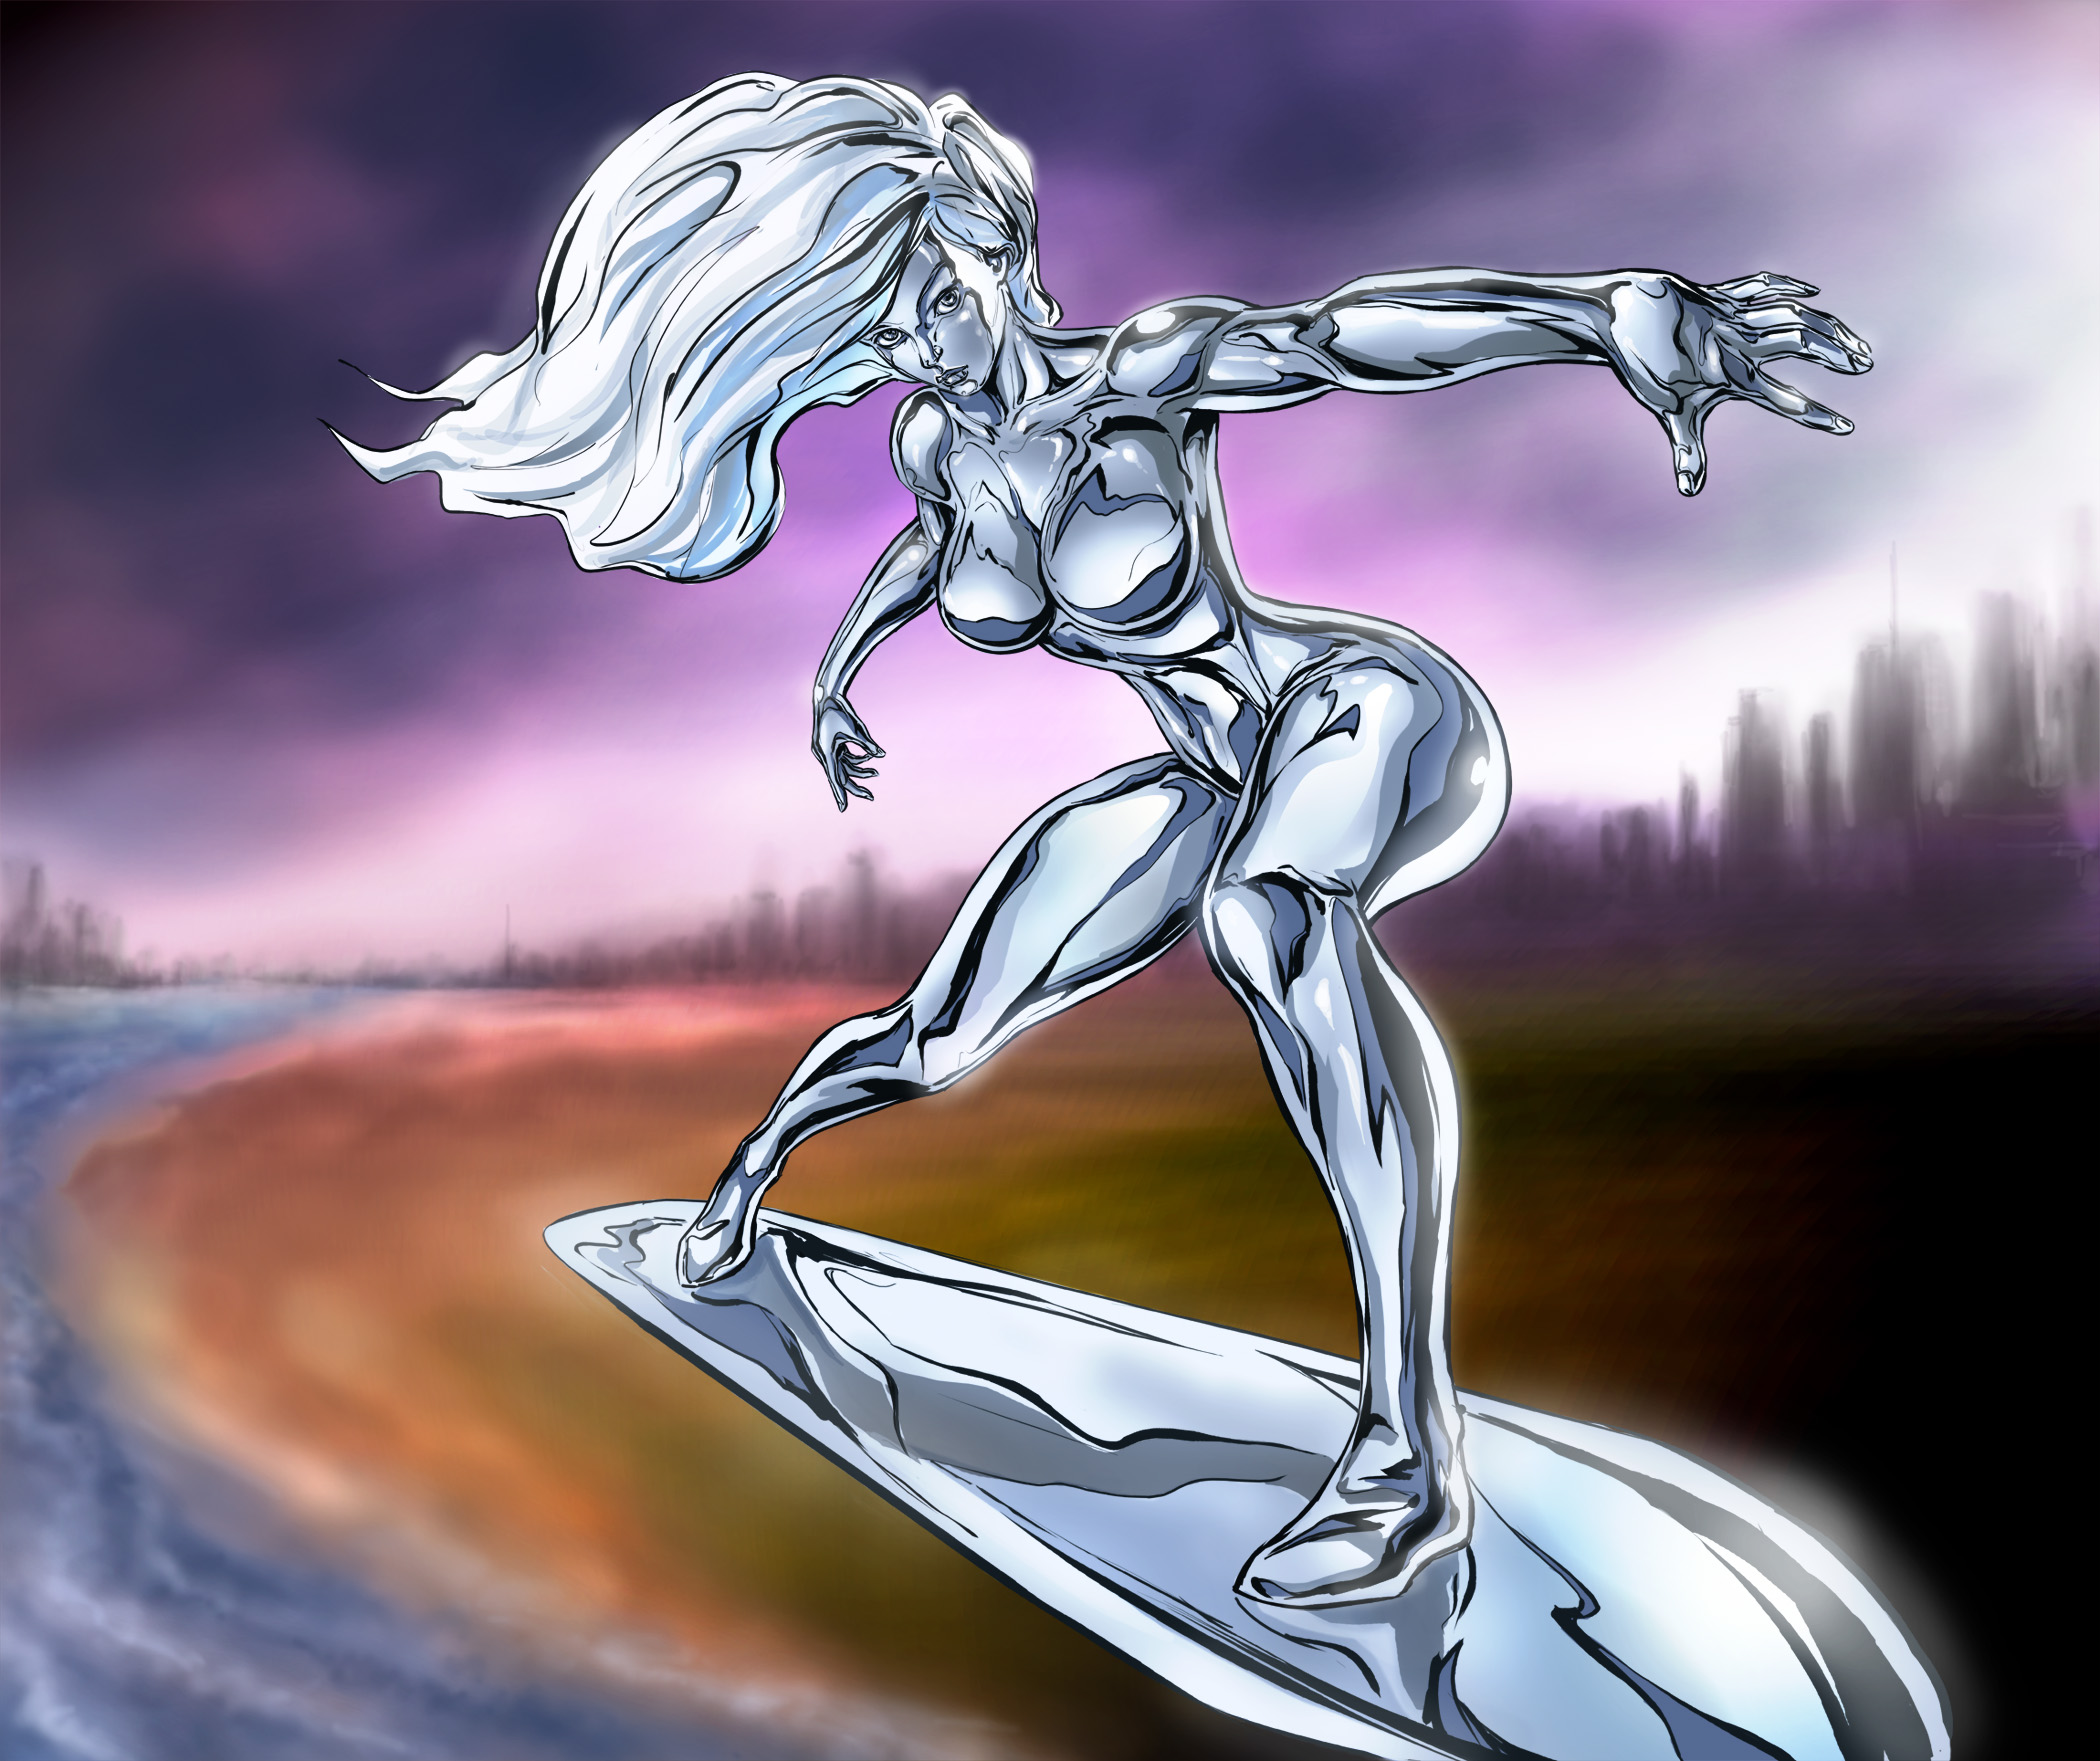 Silver Surfer new by ric3do on DeviantArt